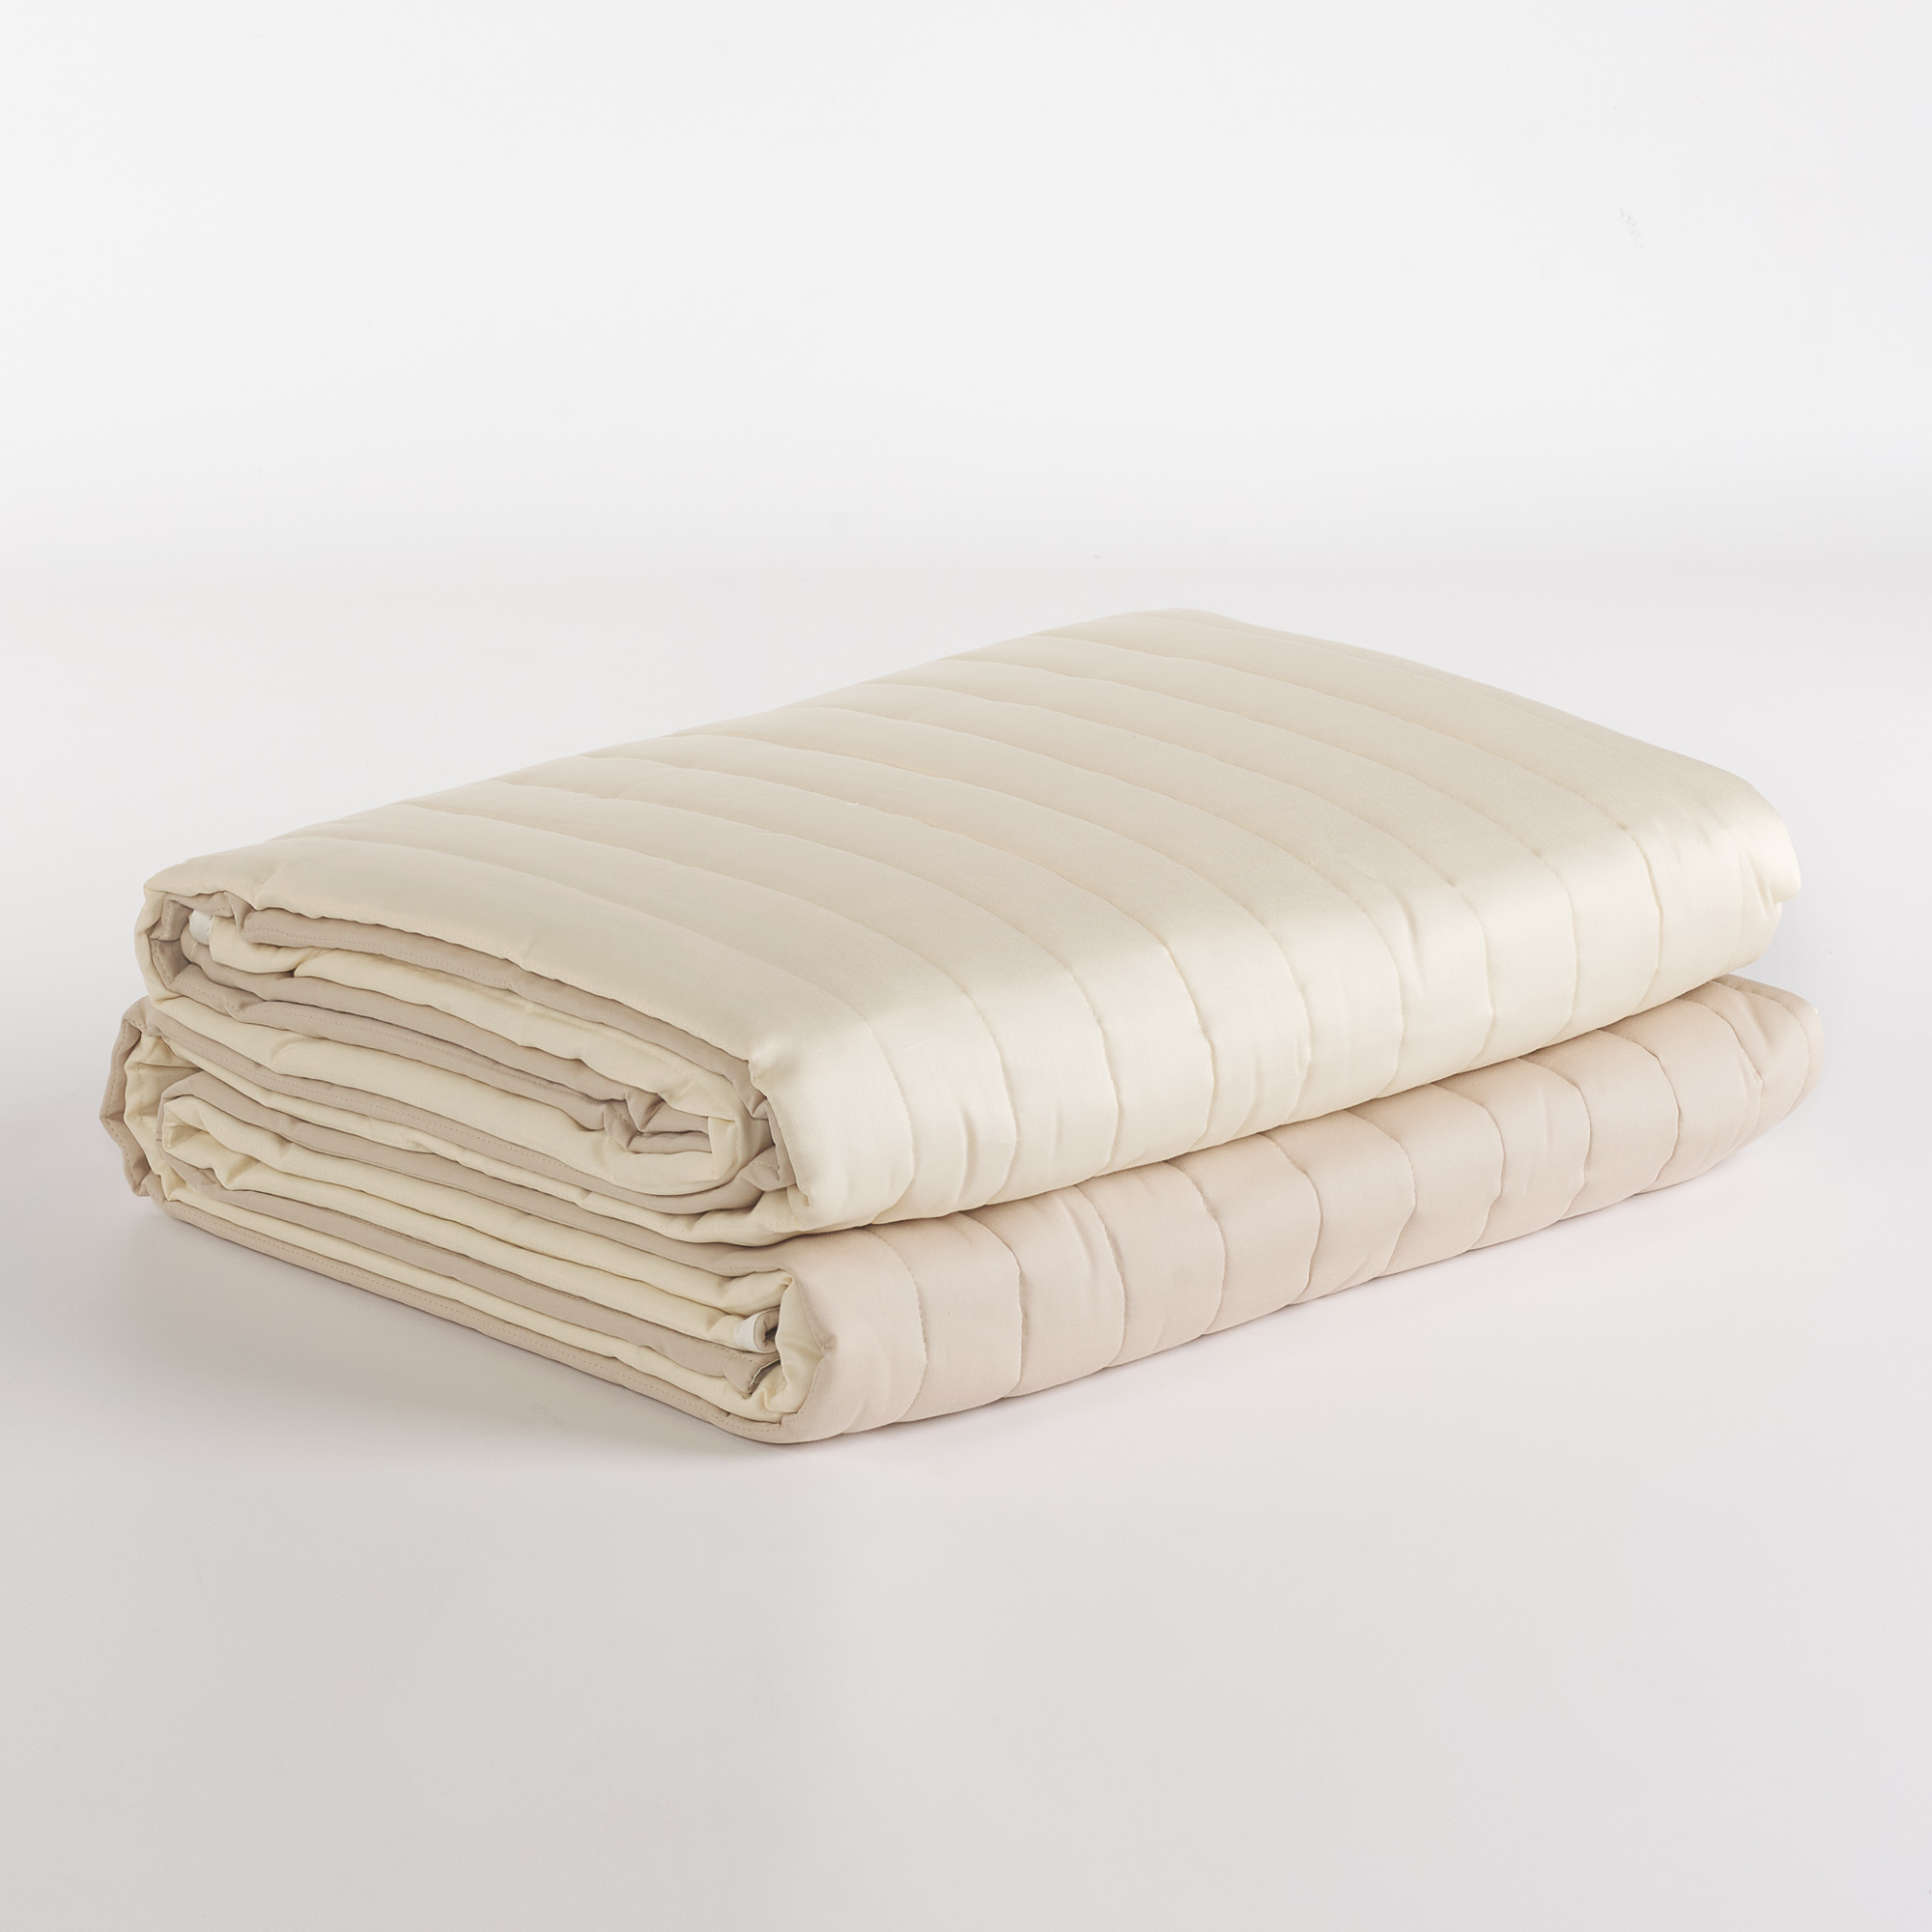 Trapuntino Quilt Double Face Antibes sabbia / crema Via Roma 60